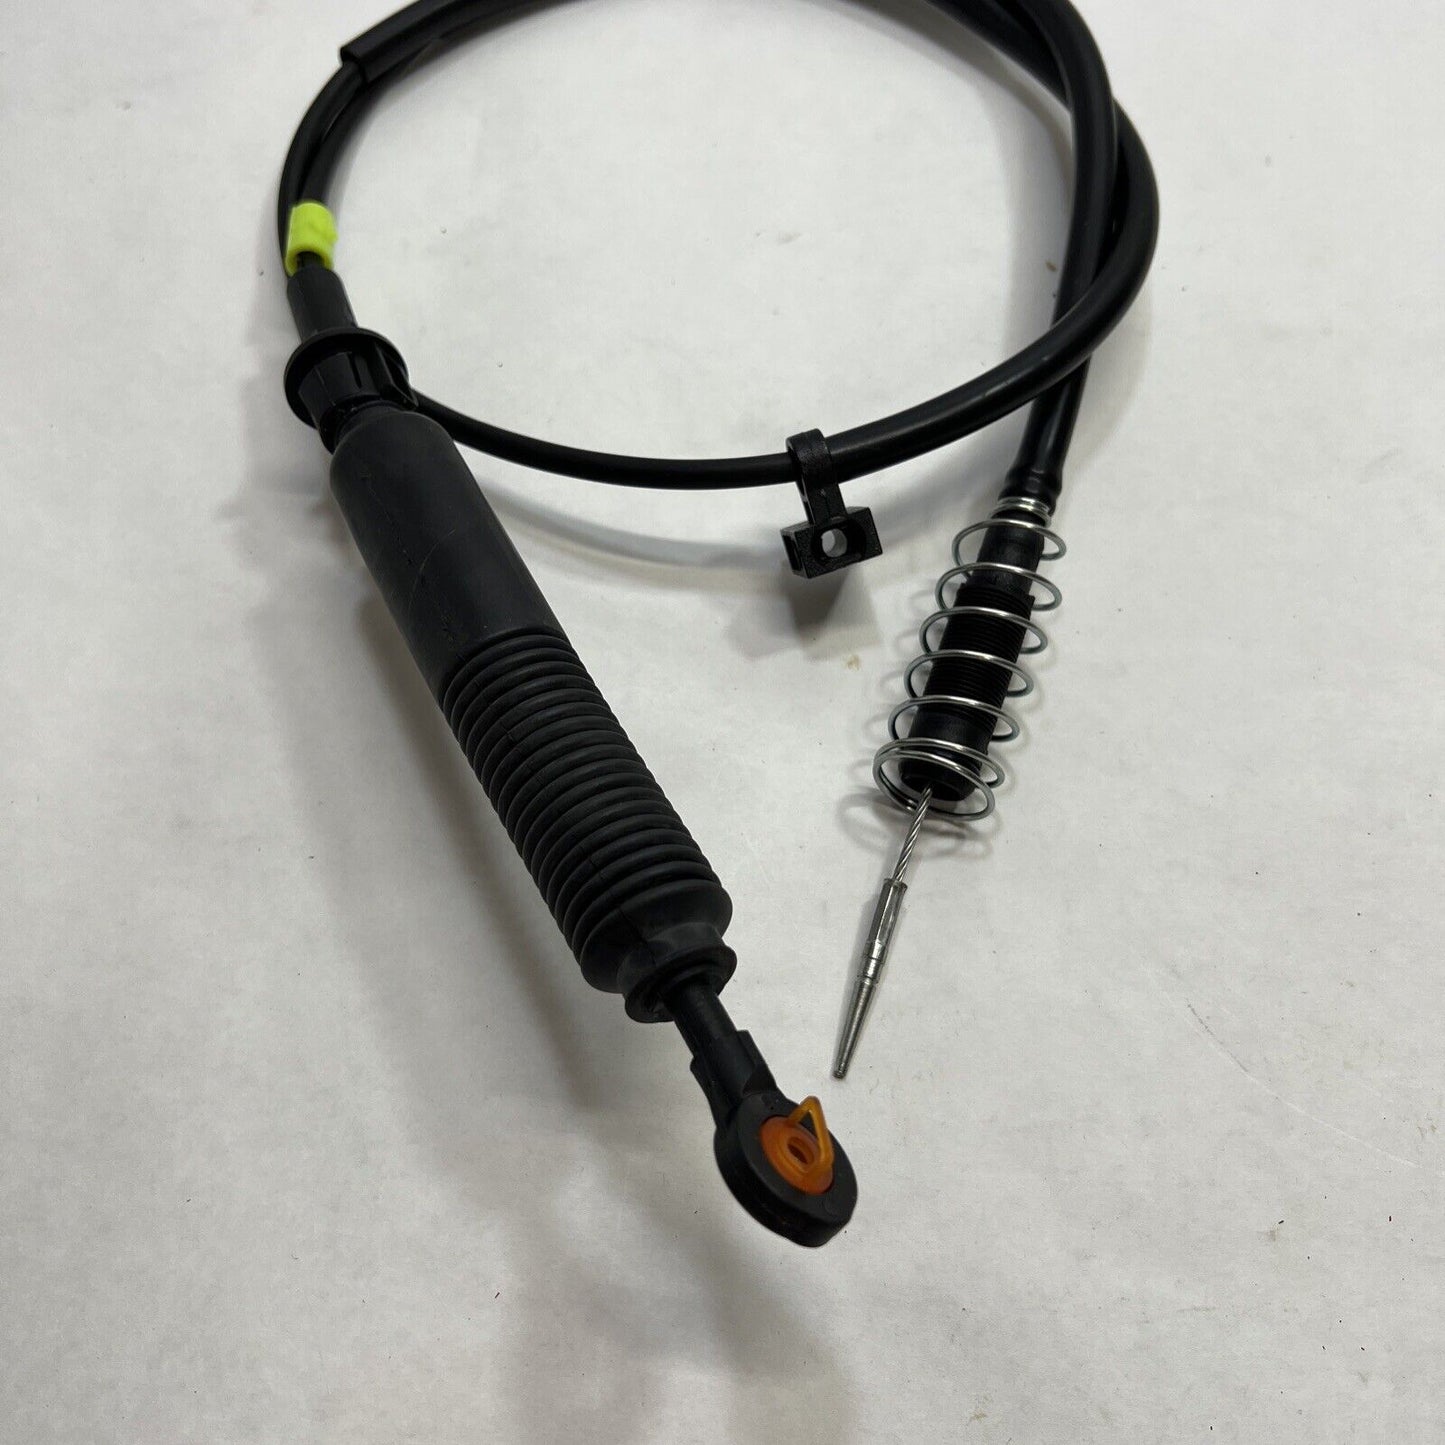 New ATP Auto Transhifter Lower Cable Y-1360